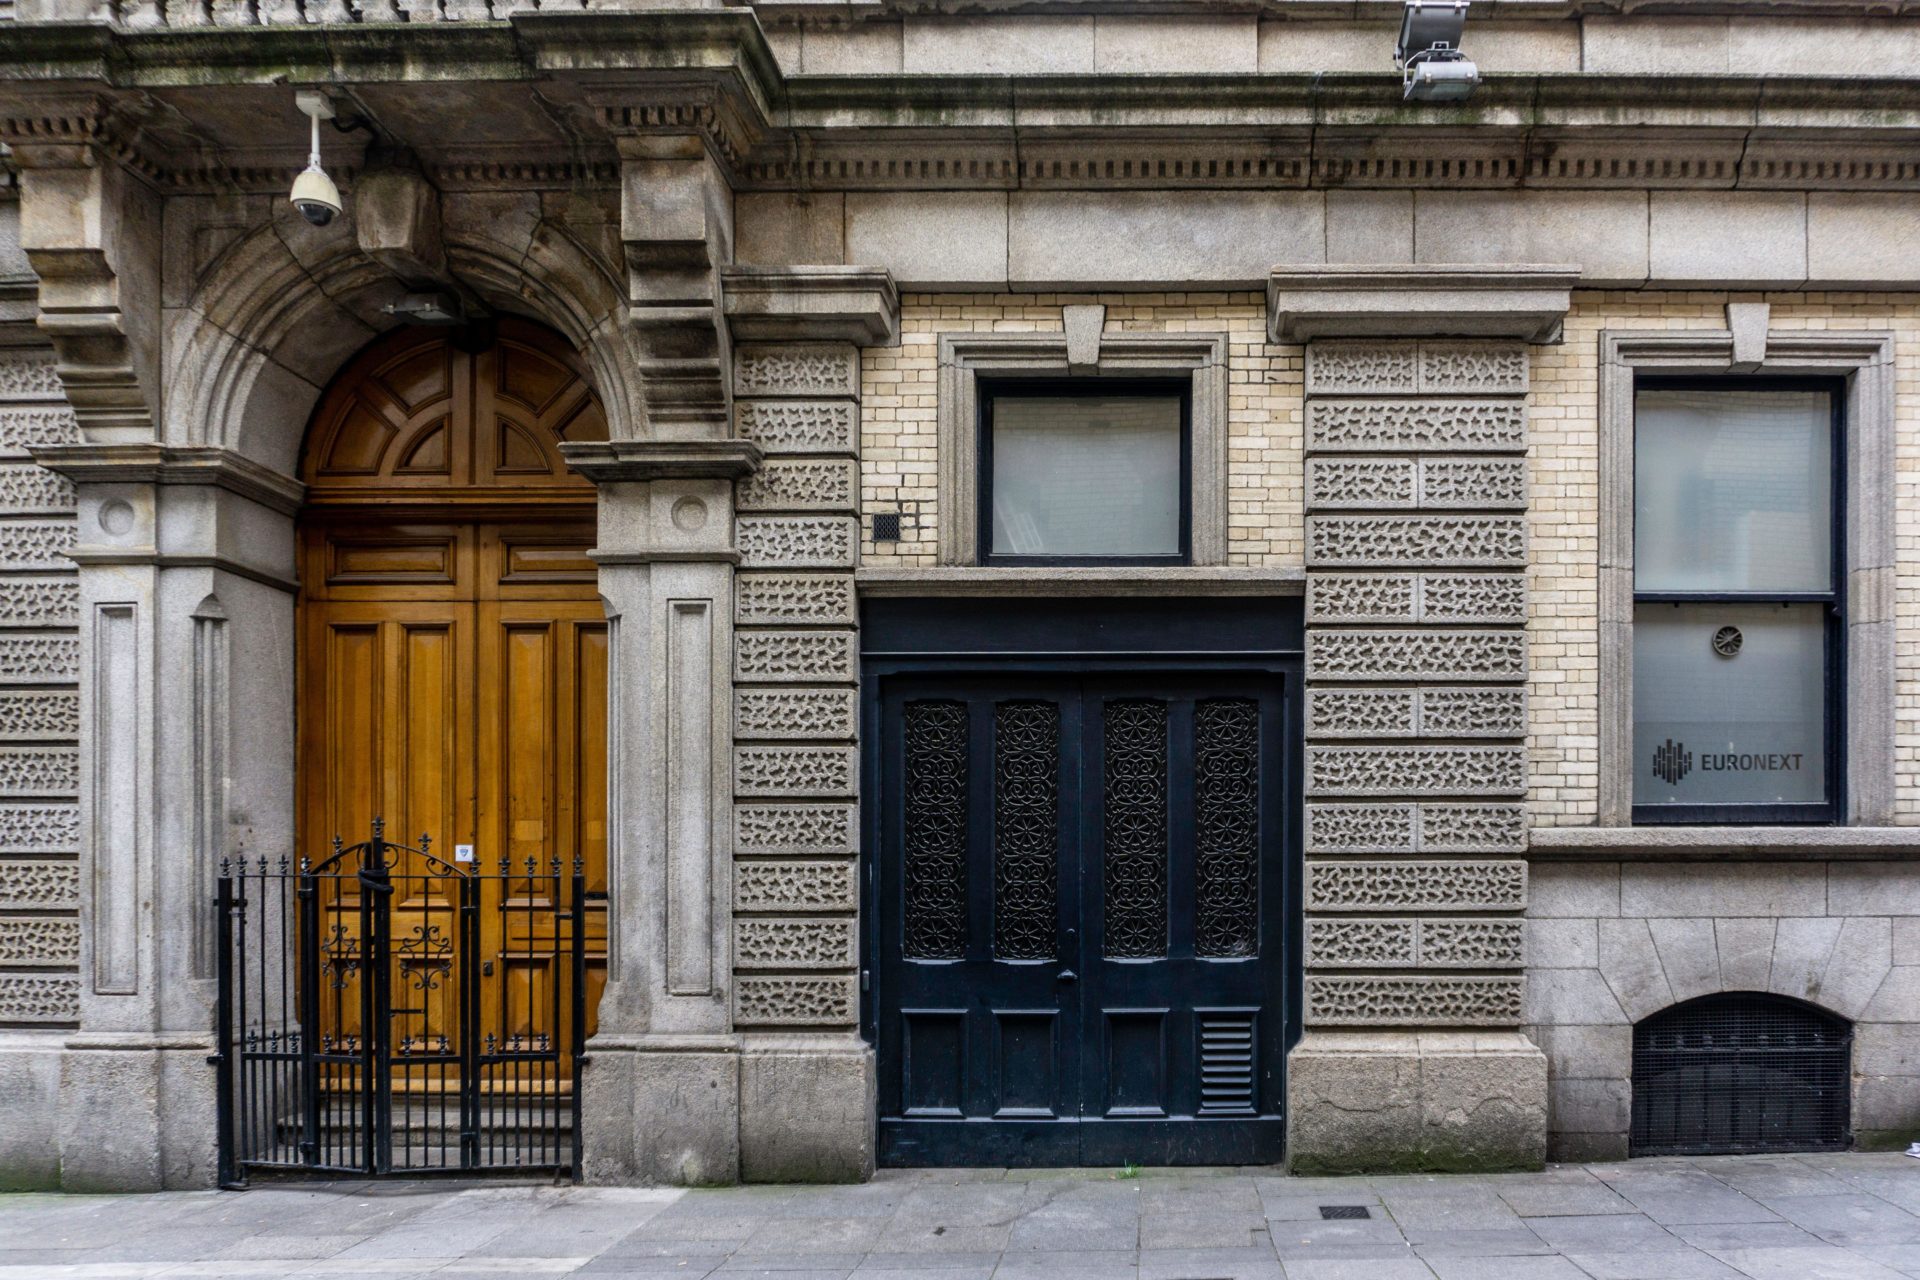 The entrance to Euronext Dublin - the Irish Stock Exchange - on Anglesea Street in the city, 20-9-20.